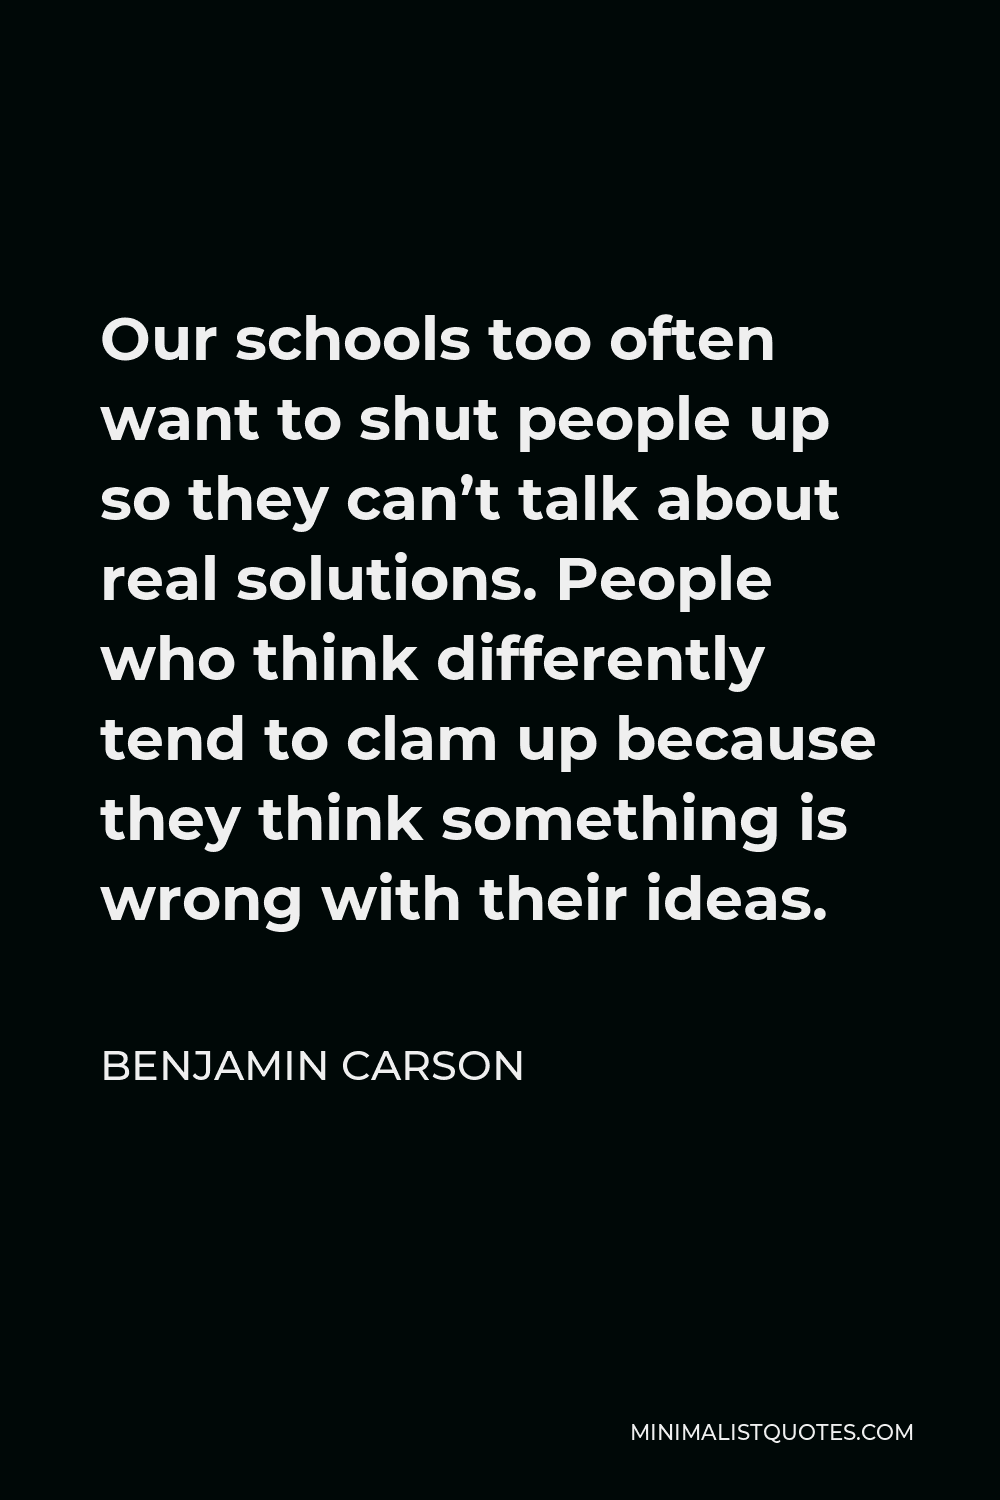 Benjamin Carson Quote - Our schools too often want to shut people up so they can’t talk about real solutions. People who think differently tend to clam up because they think something is wrong with their ideas.